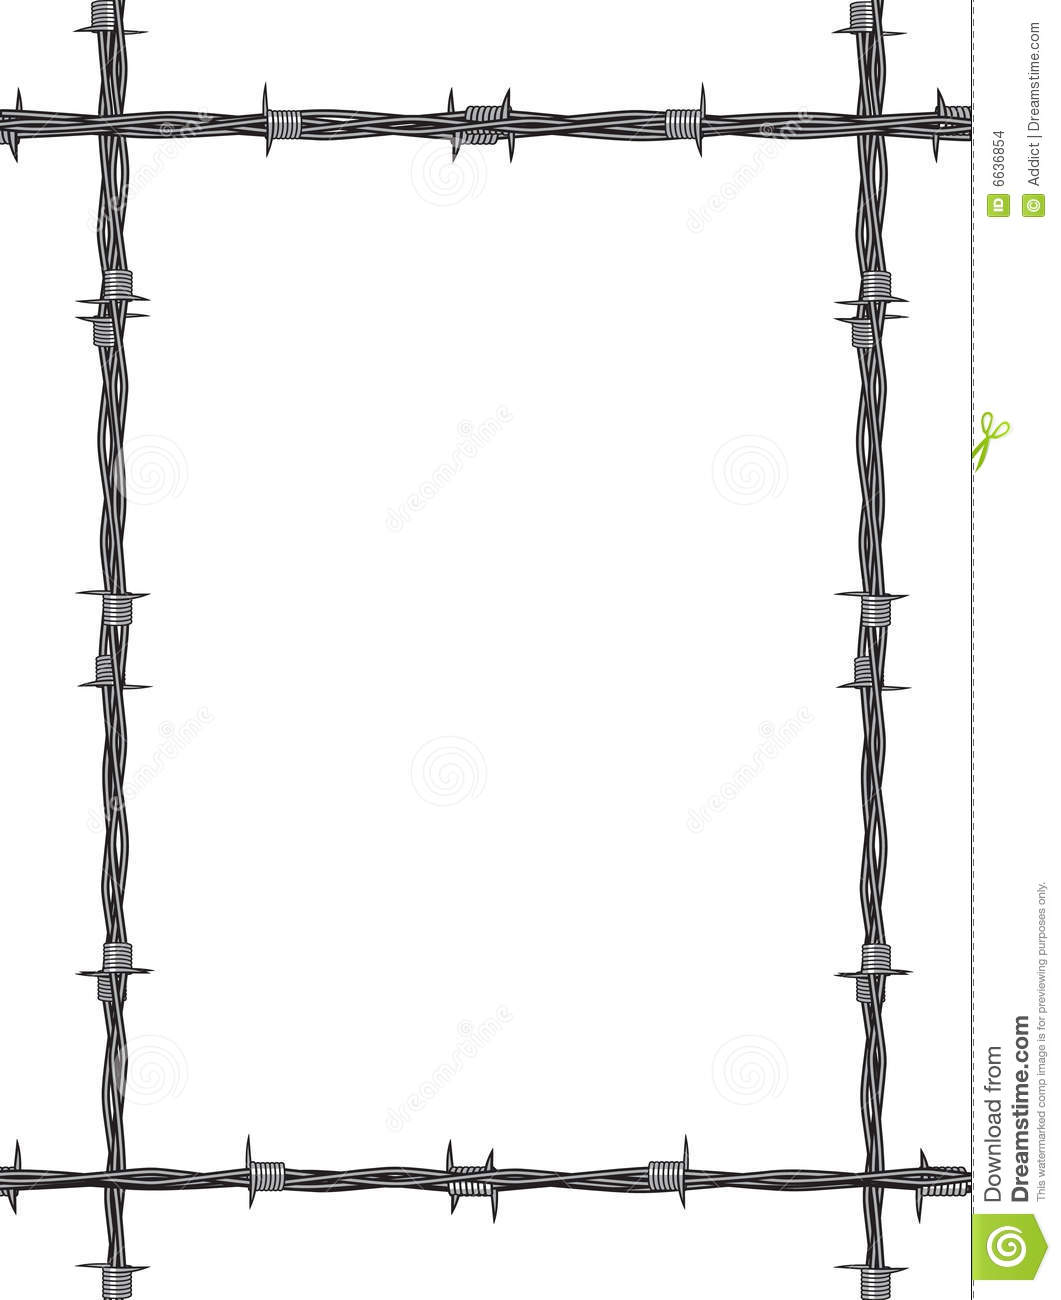 Barbed Wire Frame Isolated On White  Eps Format Available You Can